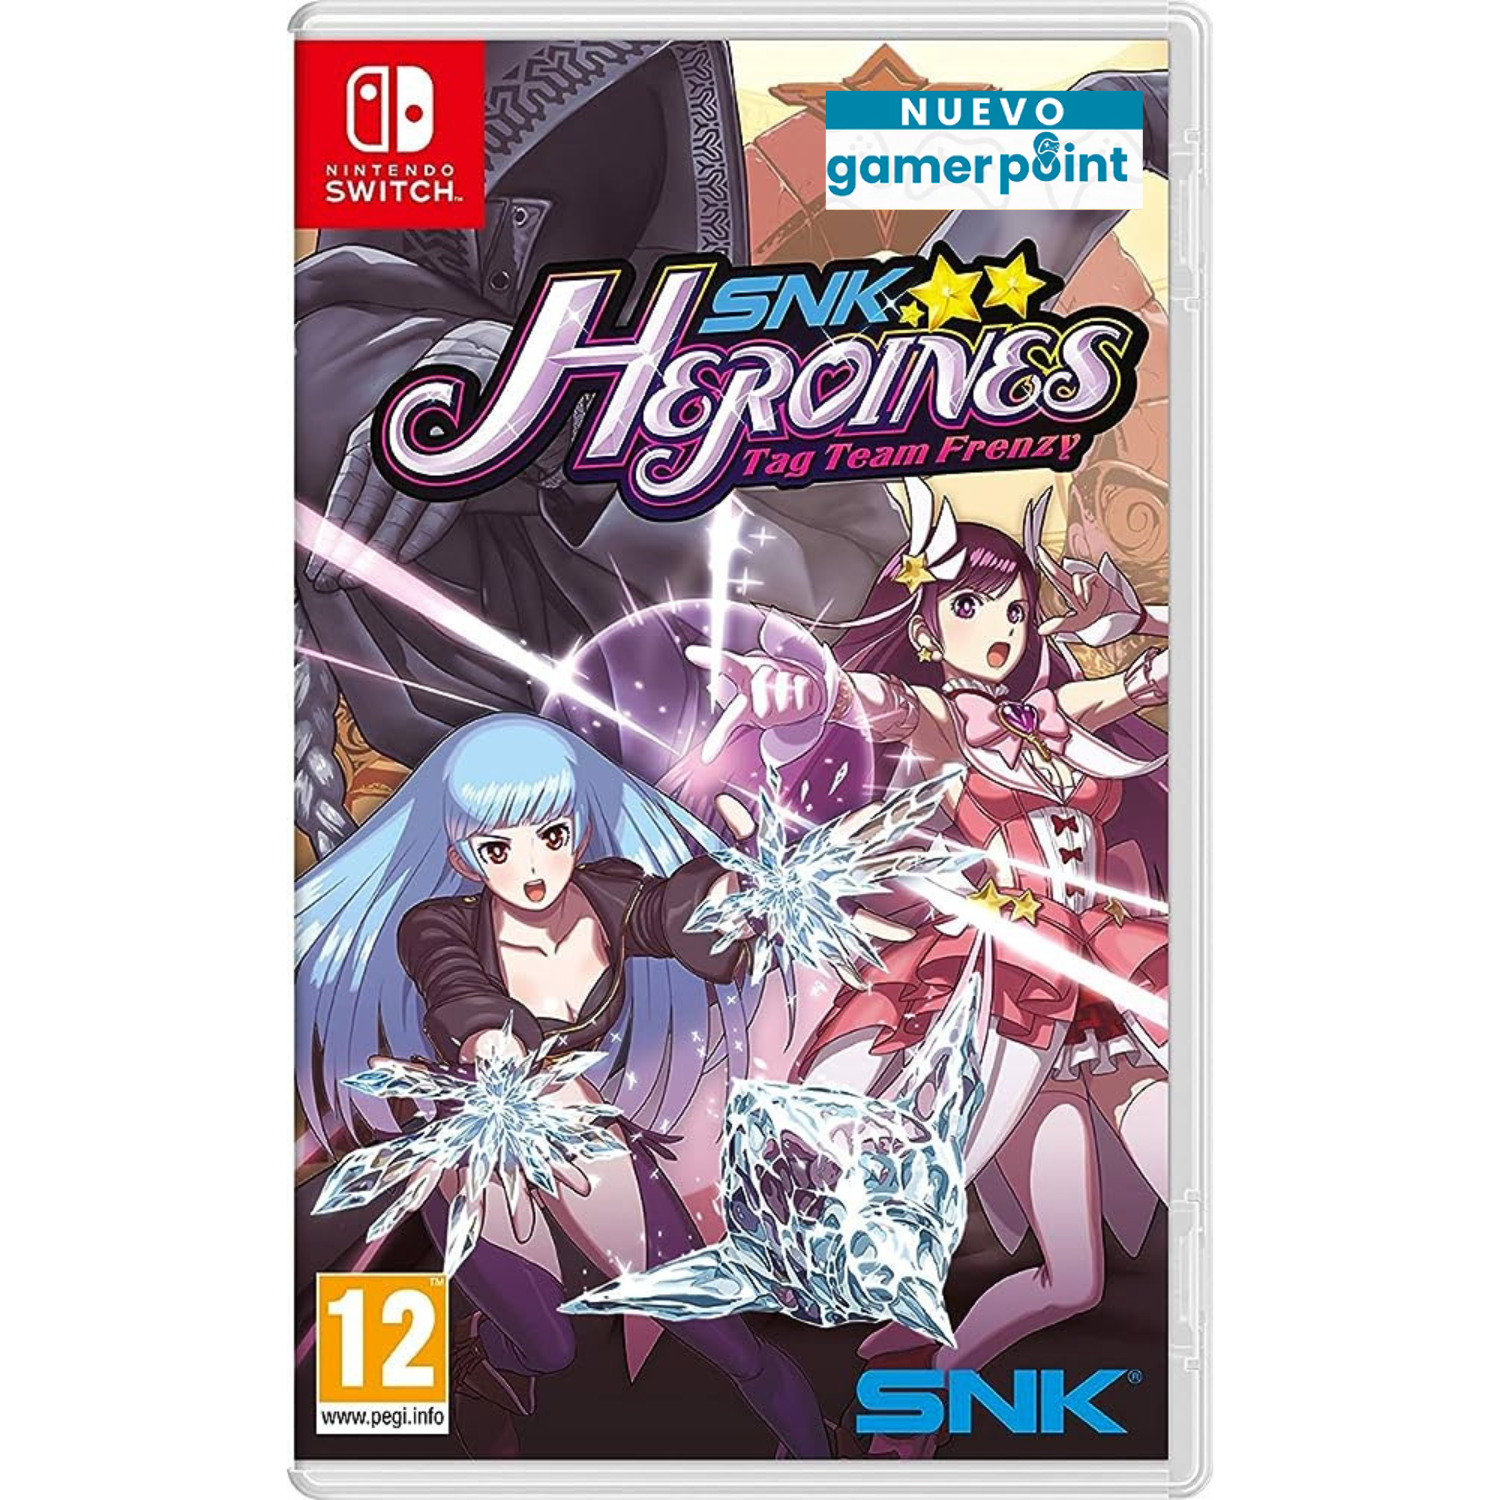 Snk Heroines: Tag Team Frenzy Nintendo Switch